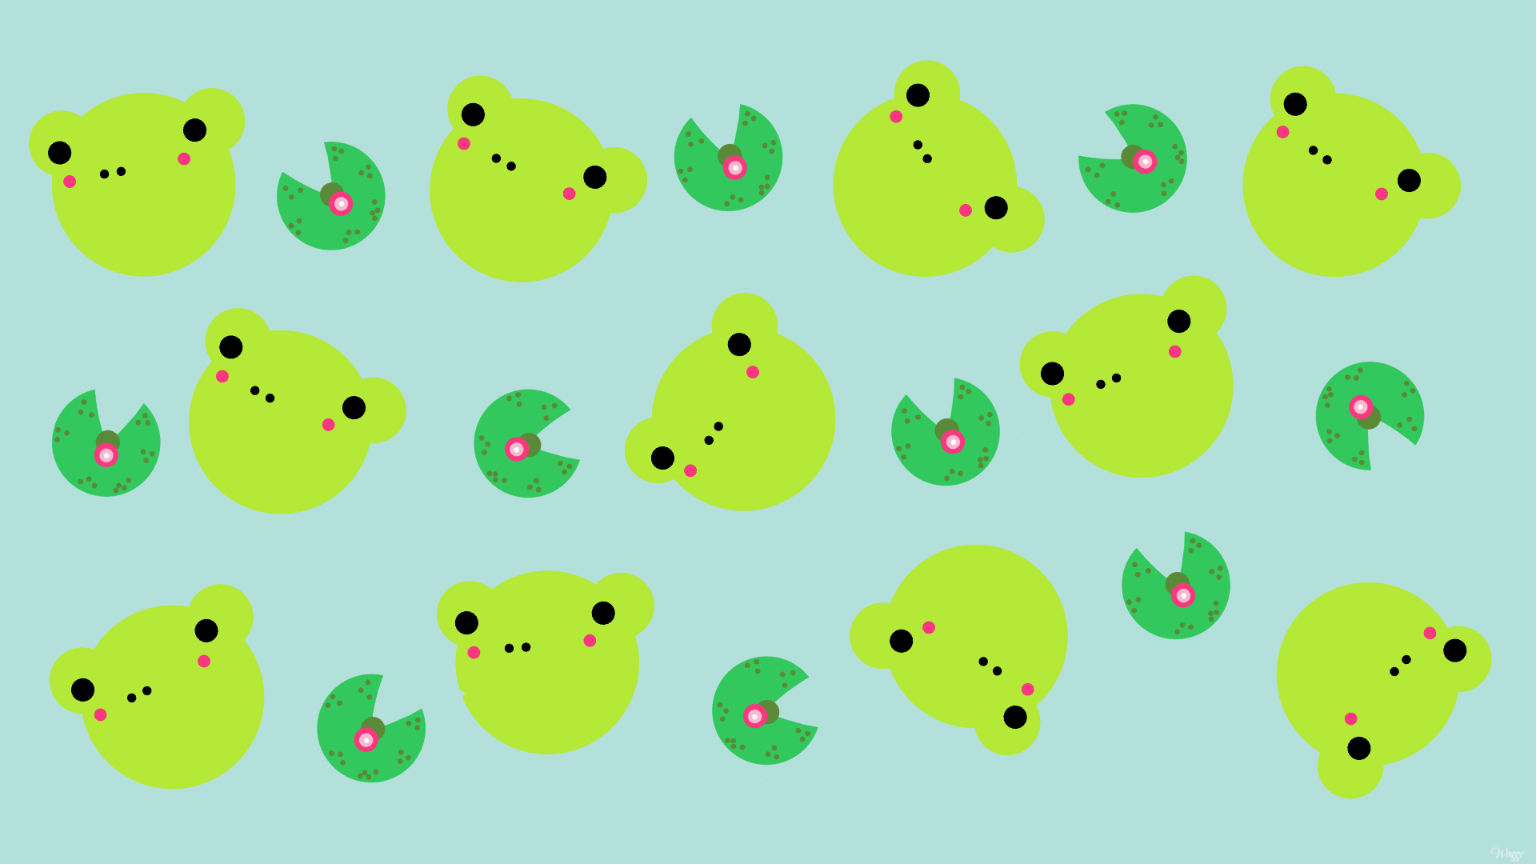 Simple Frogs Lilypads [1920 x 1080]. Frog wallpaper, Cute desktop wallpaper, Computer wallpaper desktop wallpaper